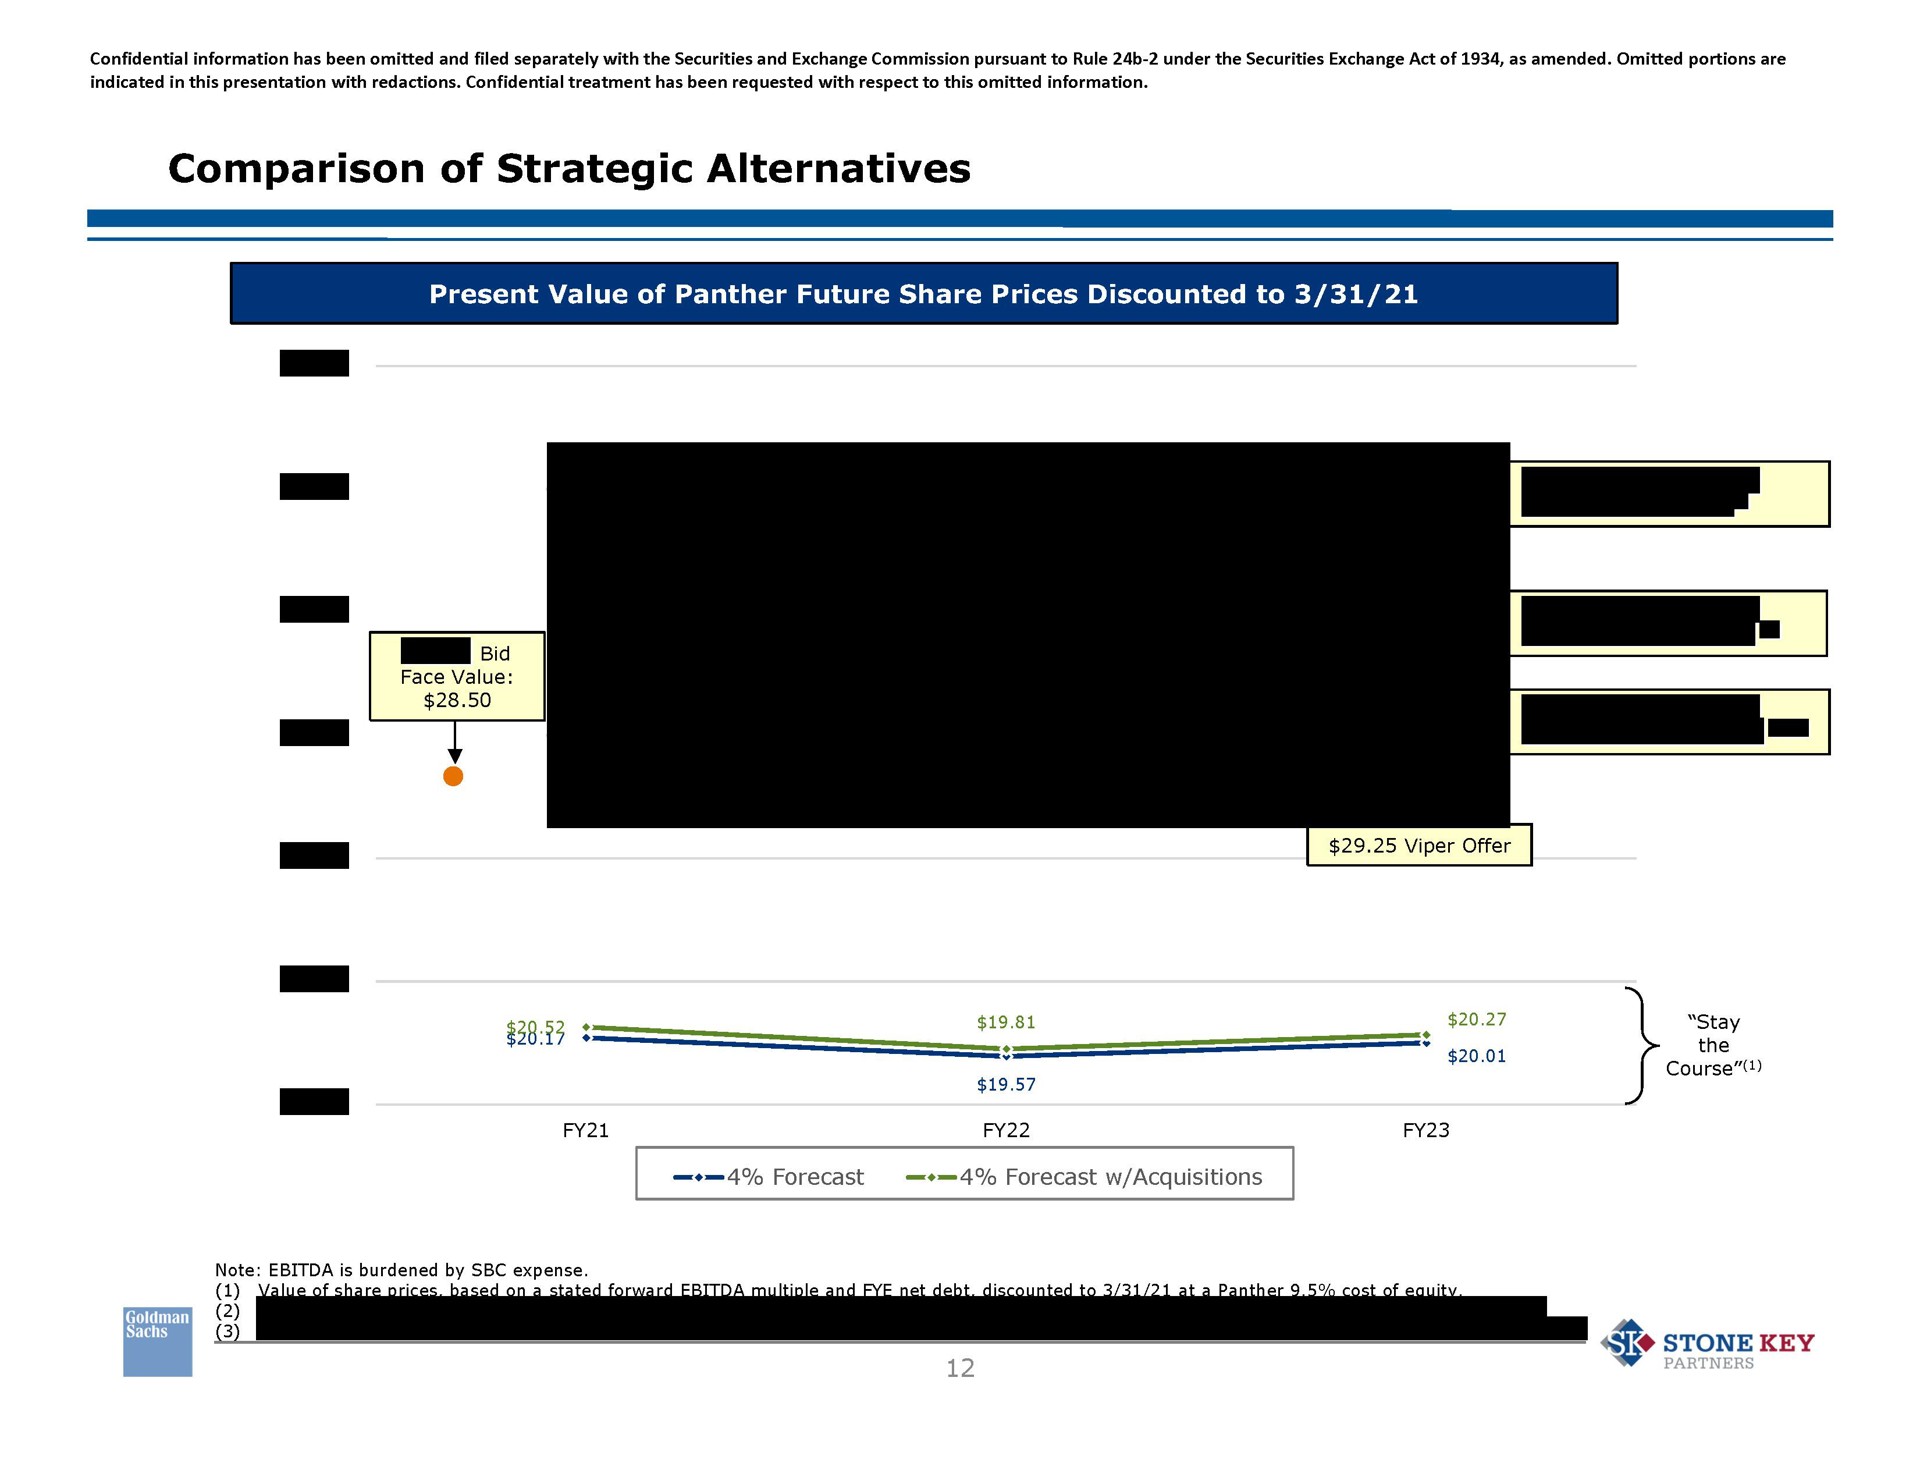 comparison of strategic alternatives present value of panther future share prices discounted to sic forecast forecast acquisitions on sig stone key | Goldman Sachs